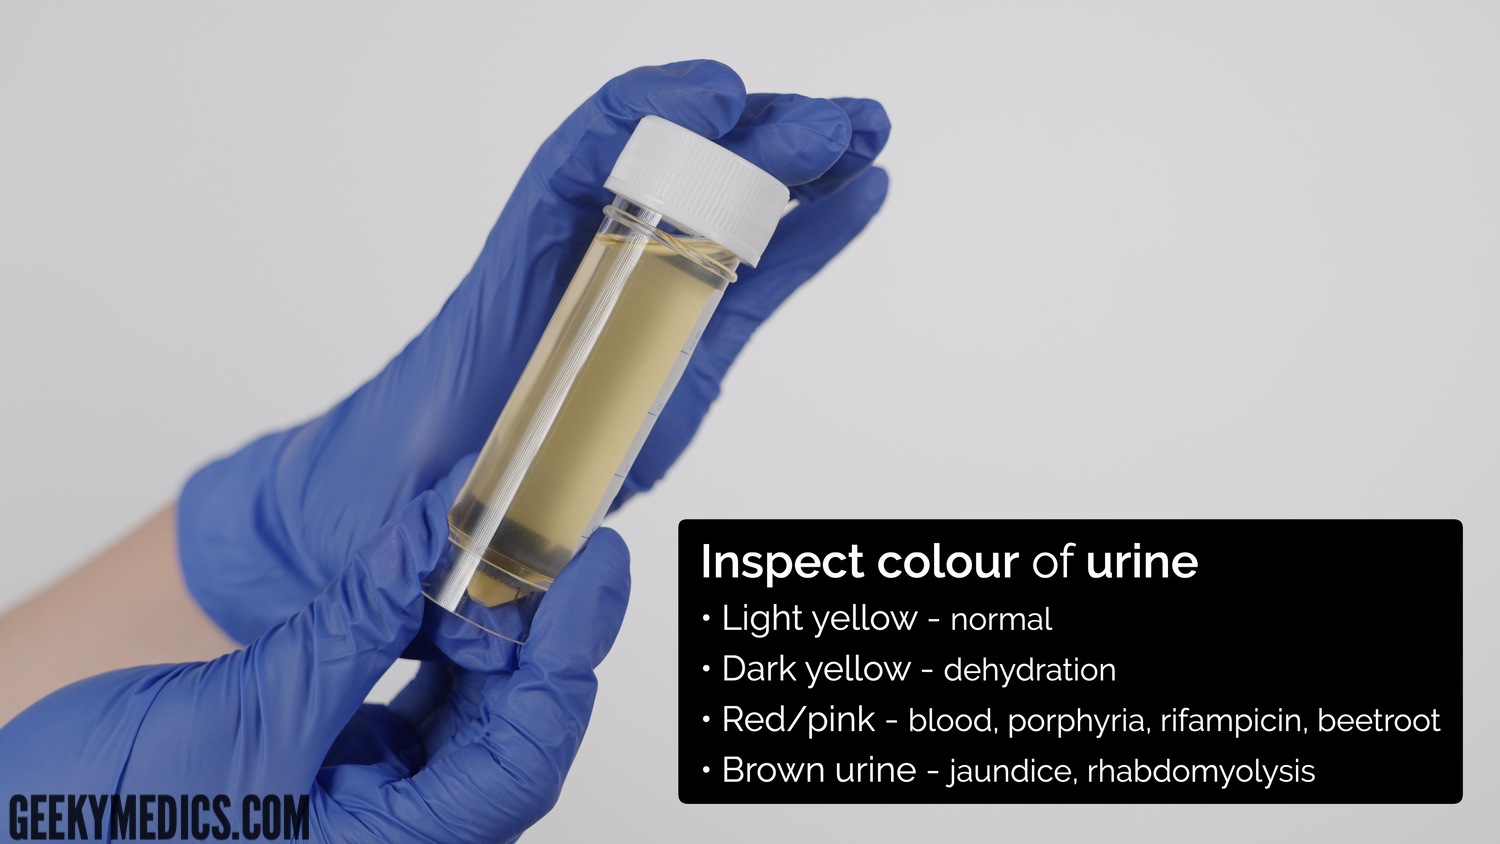 Urinalysis - inspect the colour of the urine